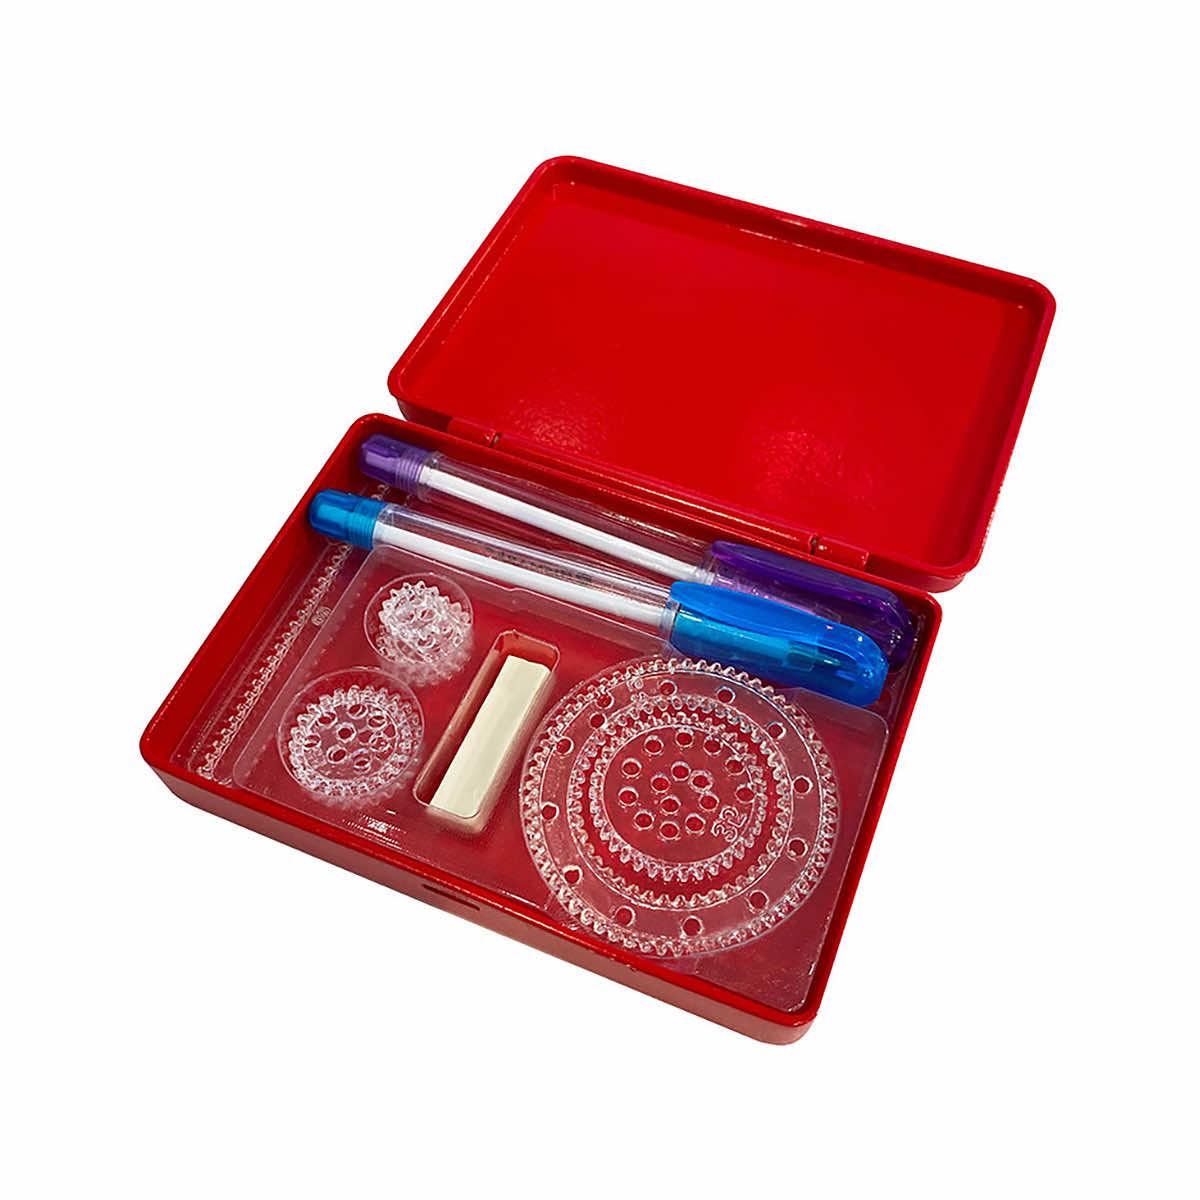 The Spirograph drawing box